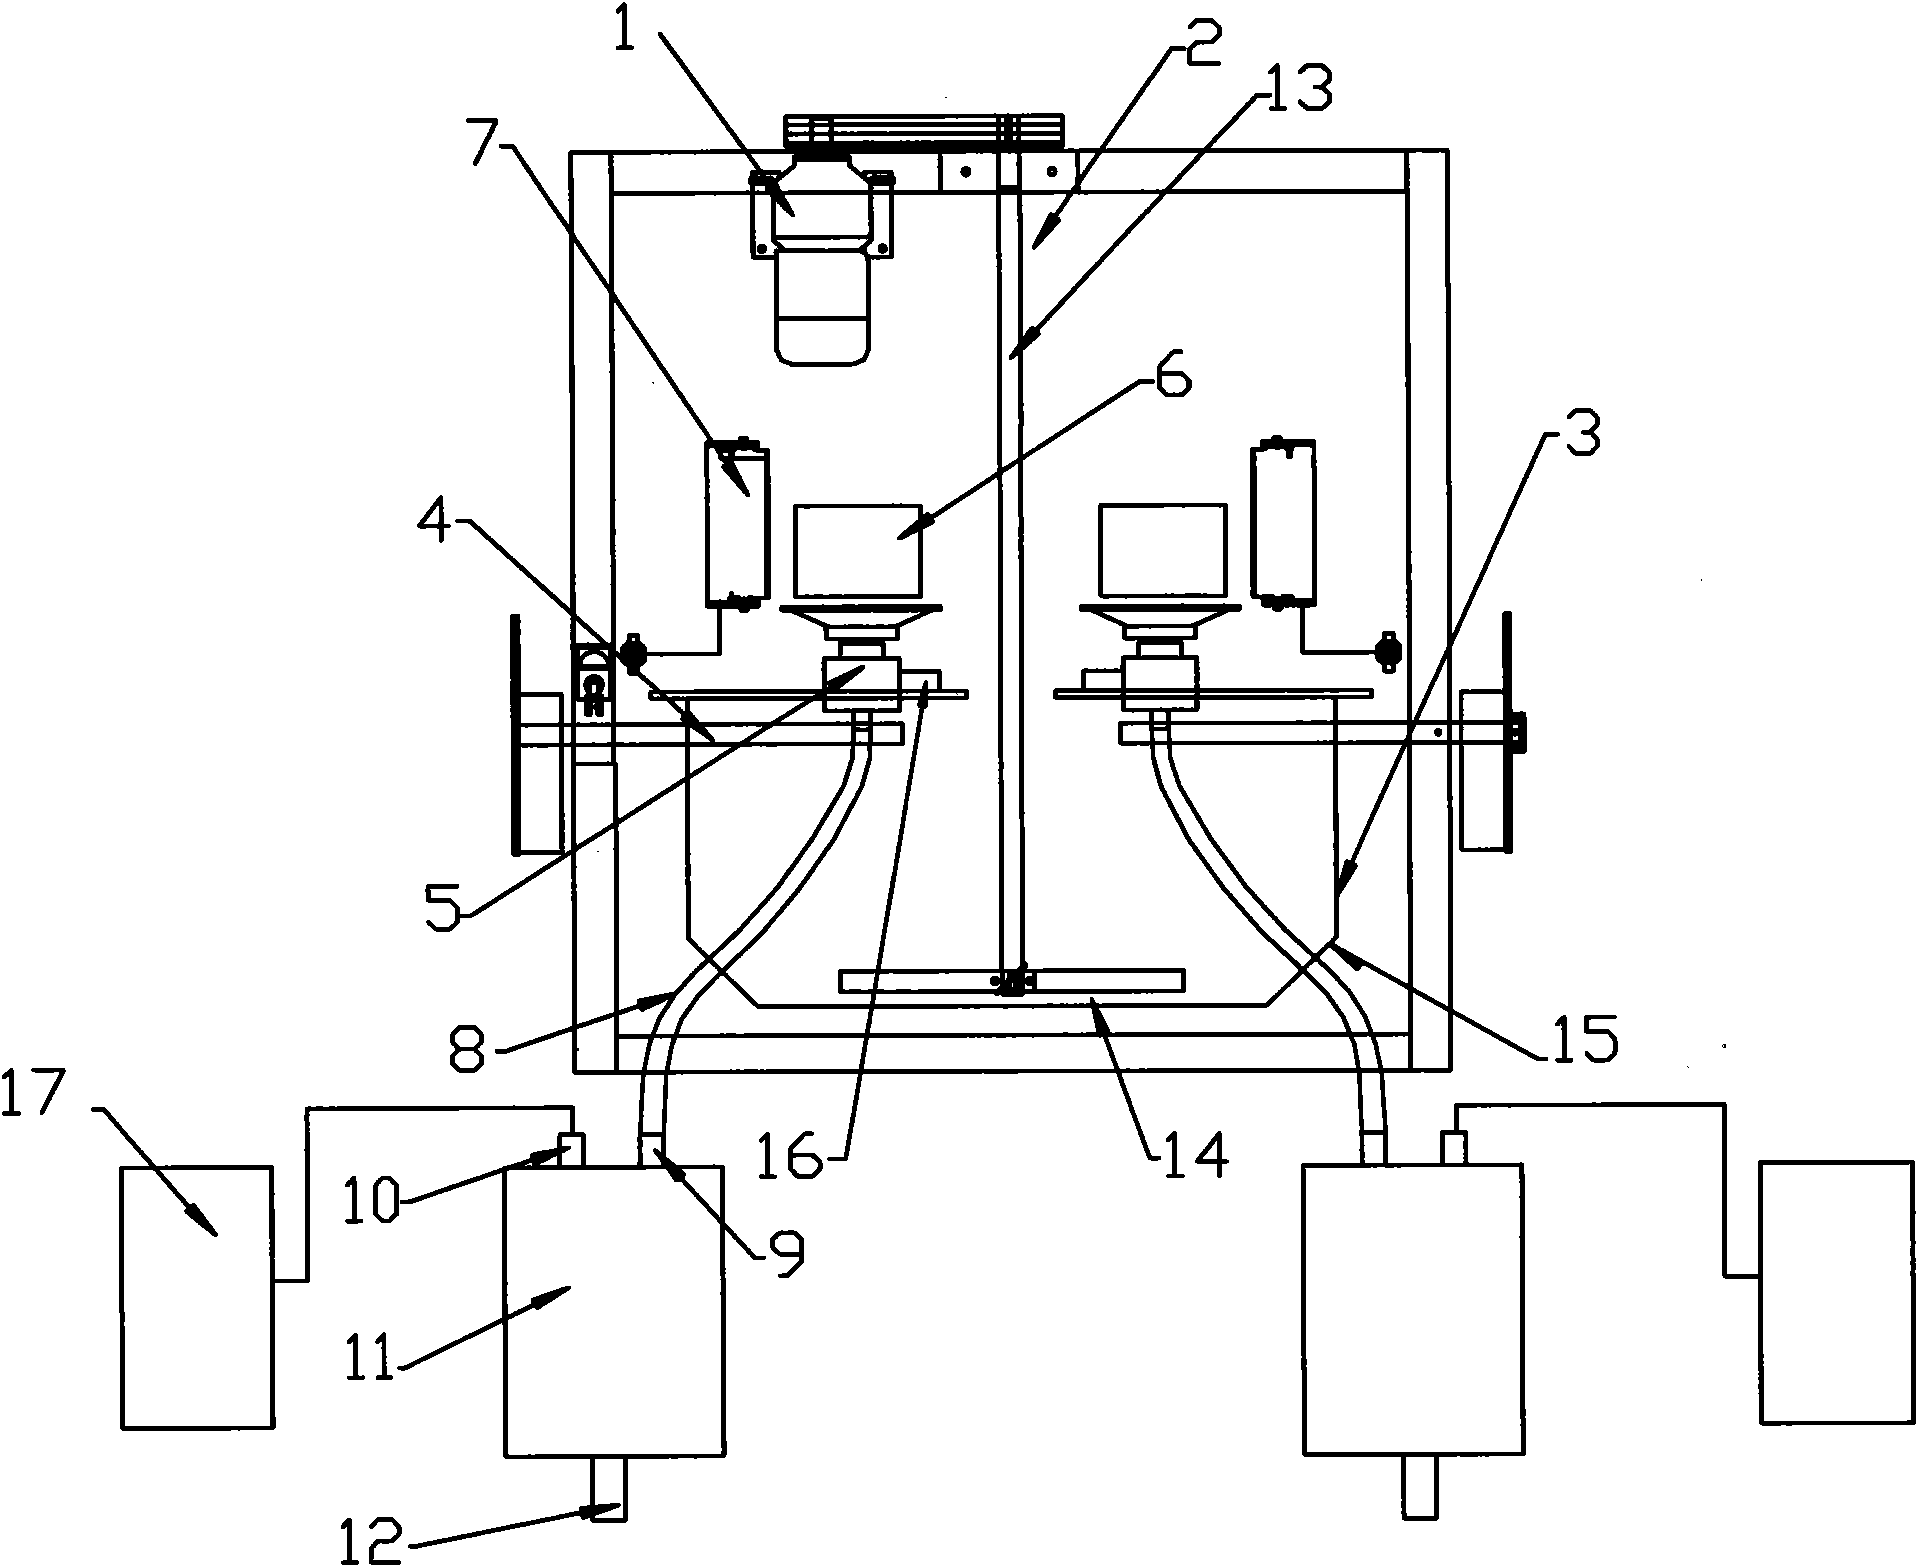 Insulating and heating riser forming device